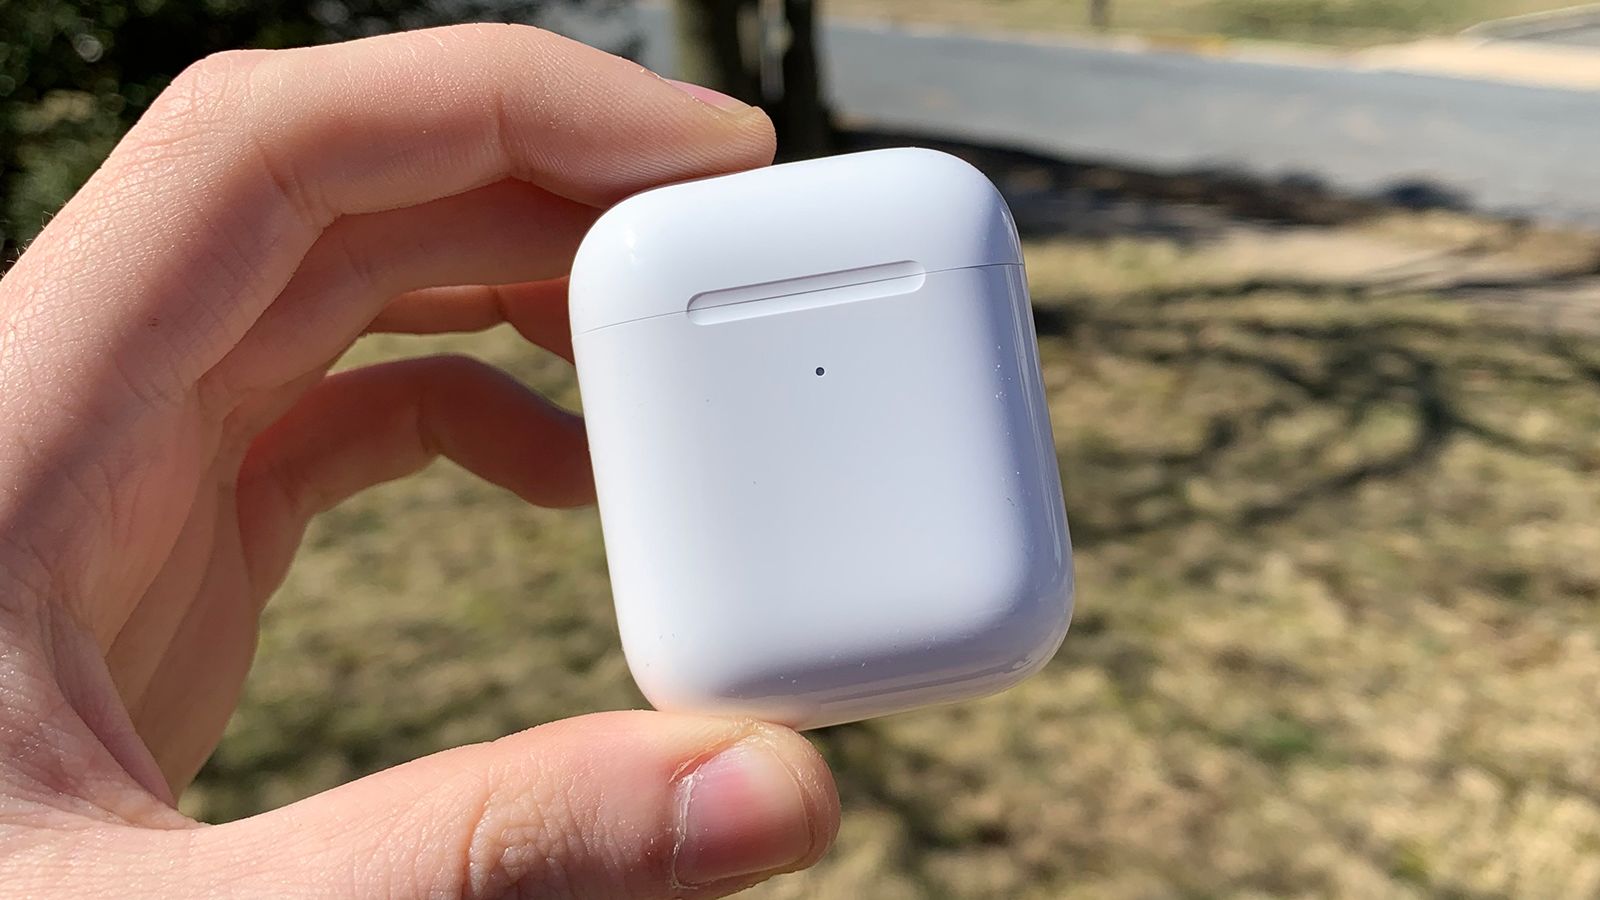 How To Track Airpod Case Without Airpods